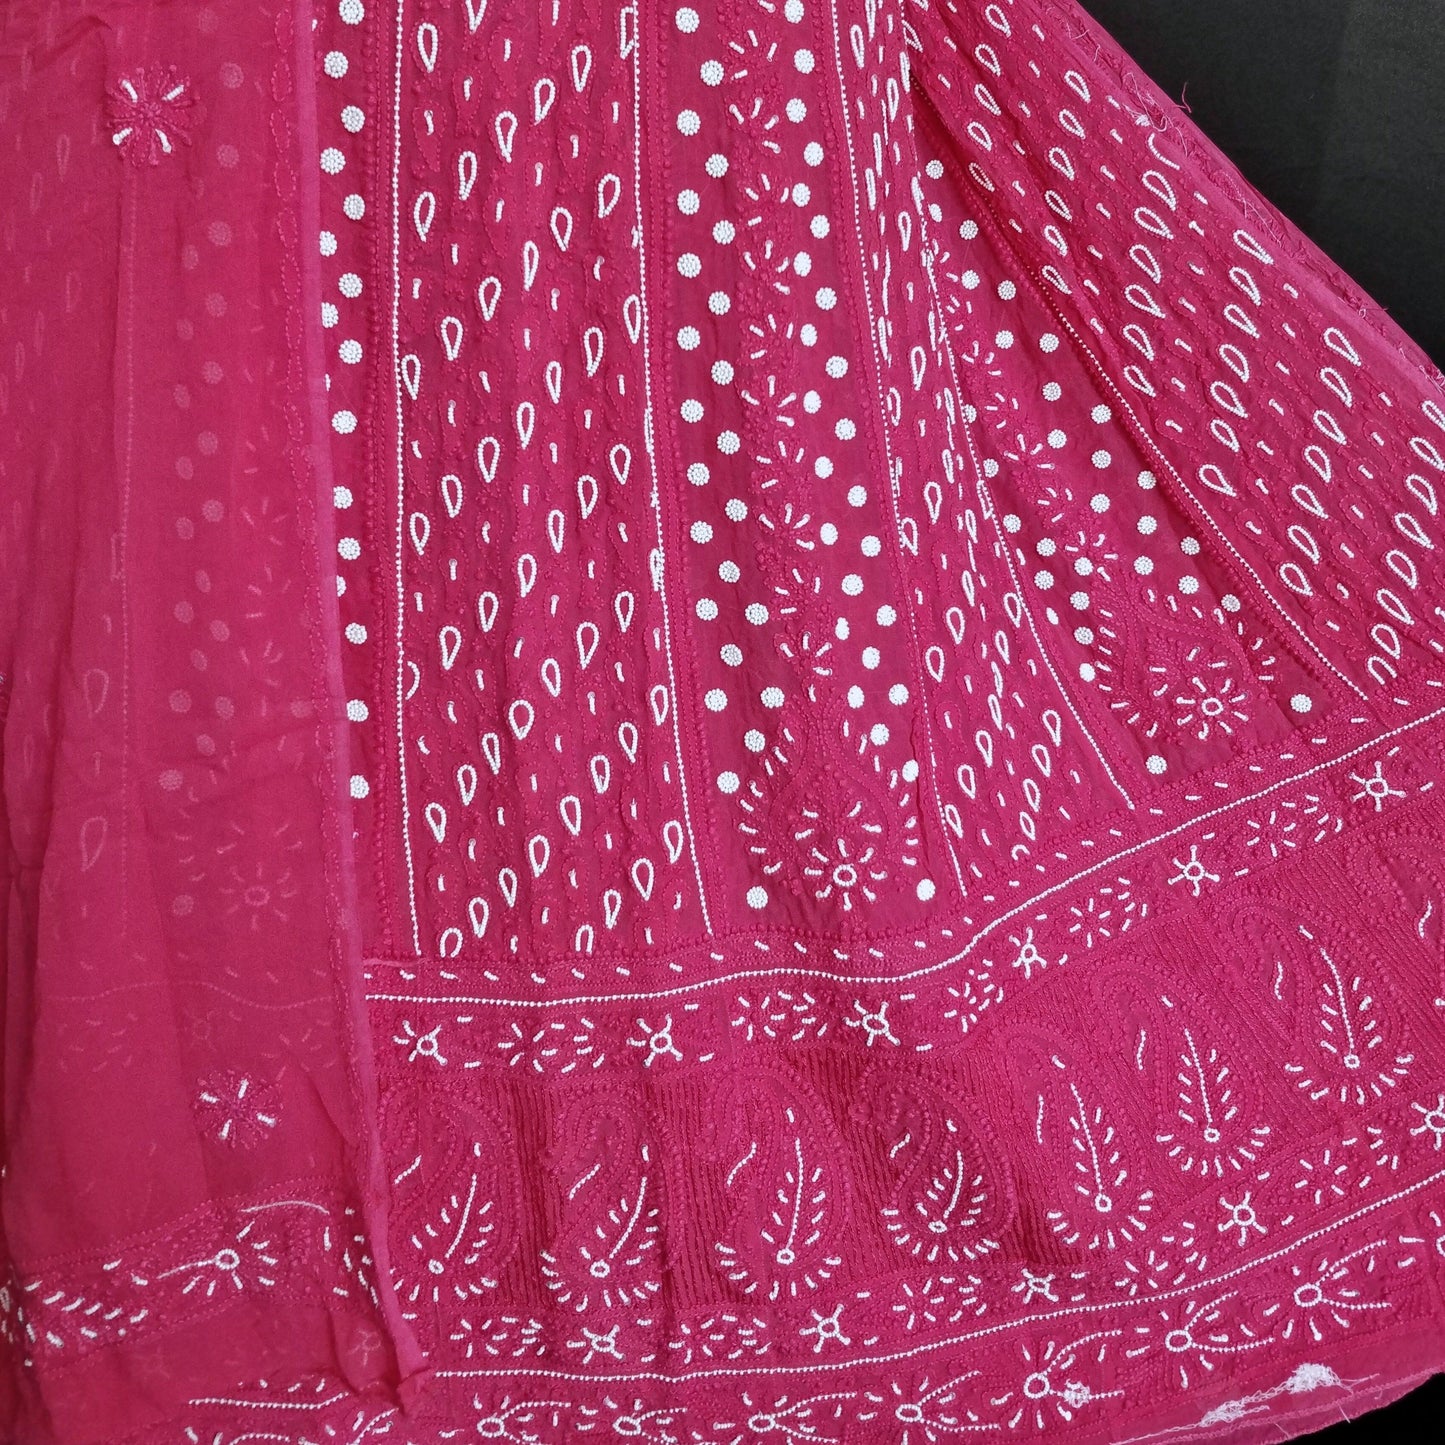 Hot Pink half pure georgette anarkali with Chikankari and pearl embroidery - Lucknowi Andaaz